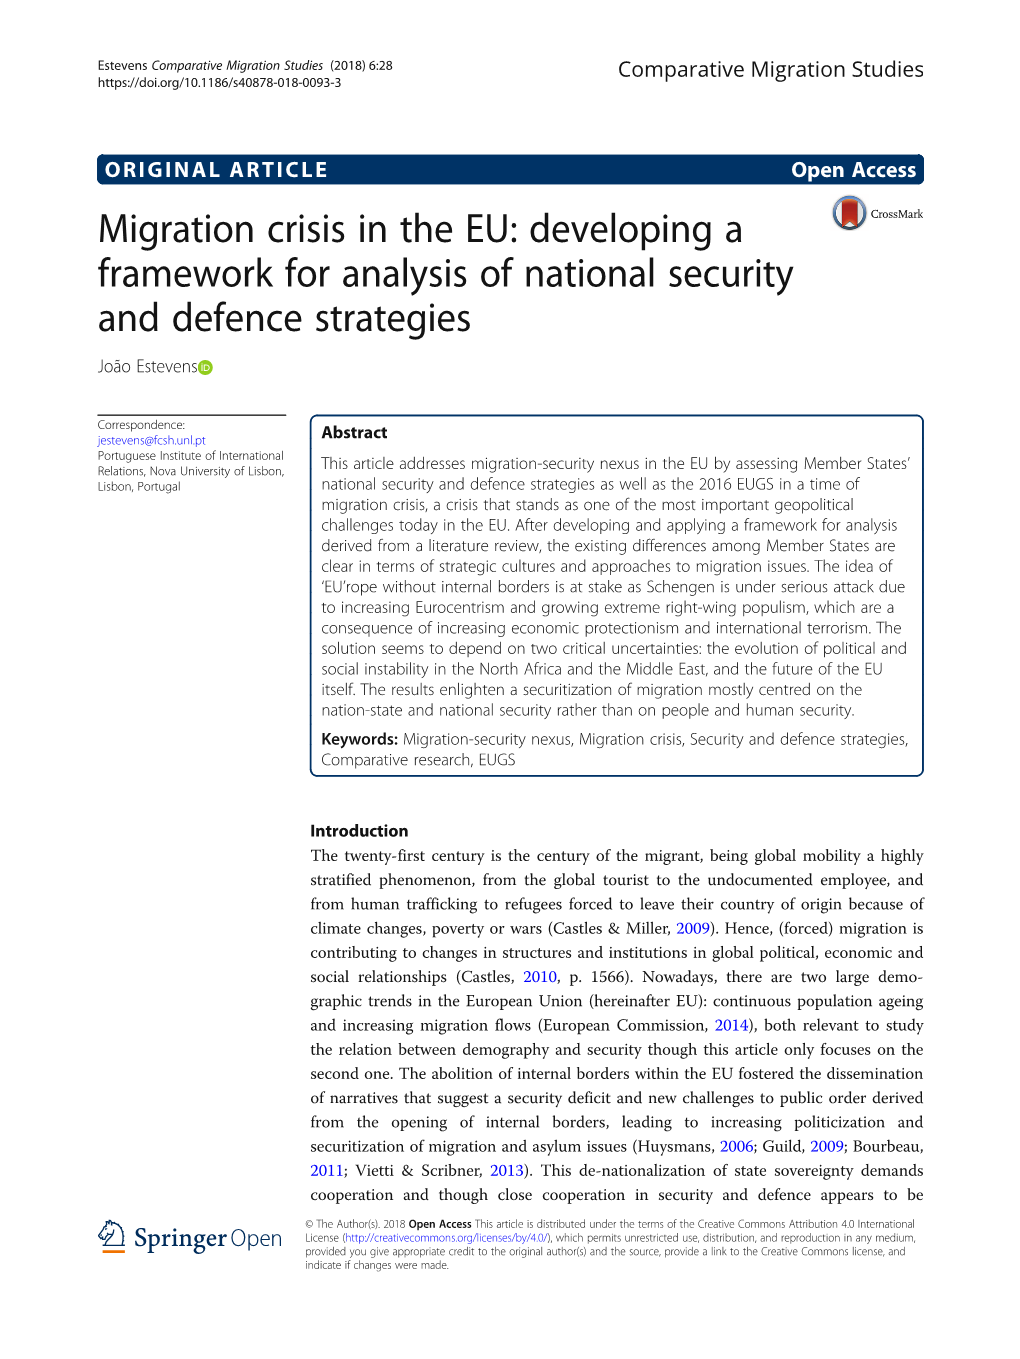 Migration Crisis in the EU: Developing a Framework for Analysis of National Security and Defence Strategies João Estevens